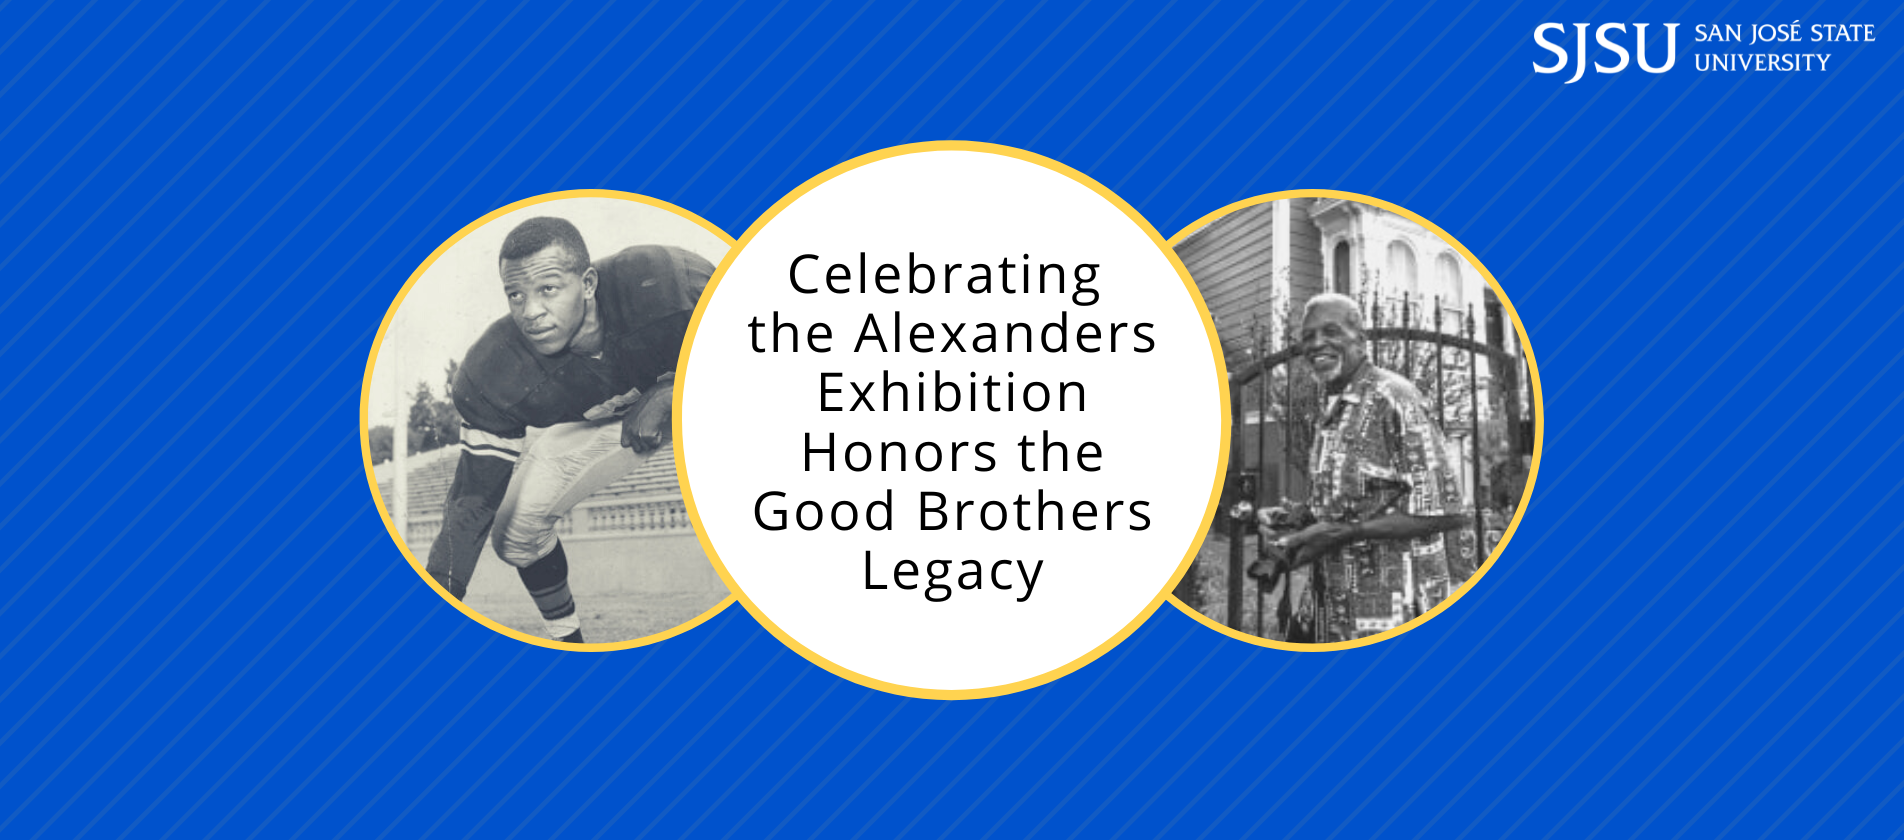 Banner for Celebrating the Alexanders Exhibition Honors the Good Brothers Legacy at SJSU